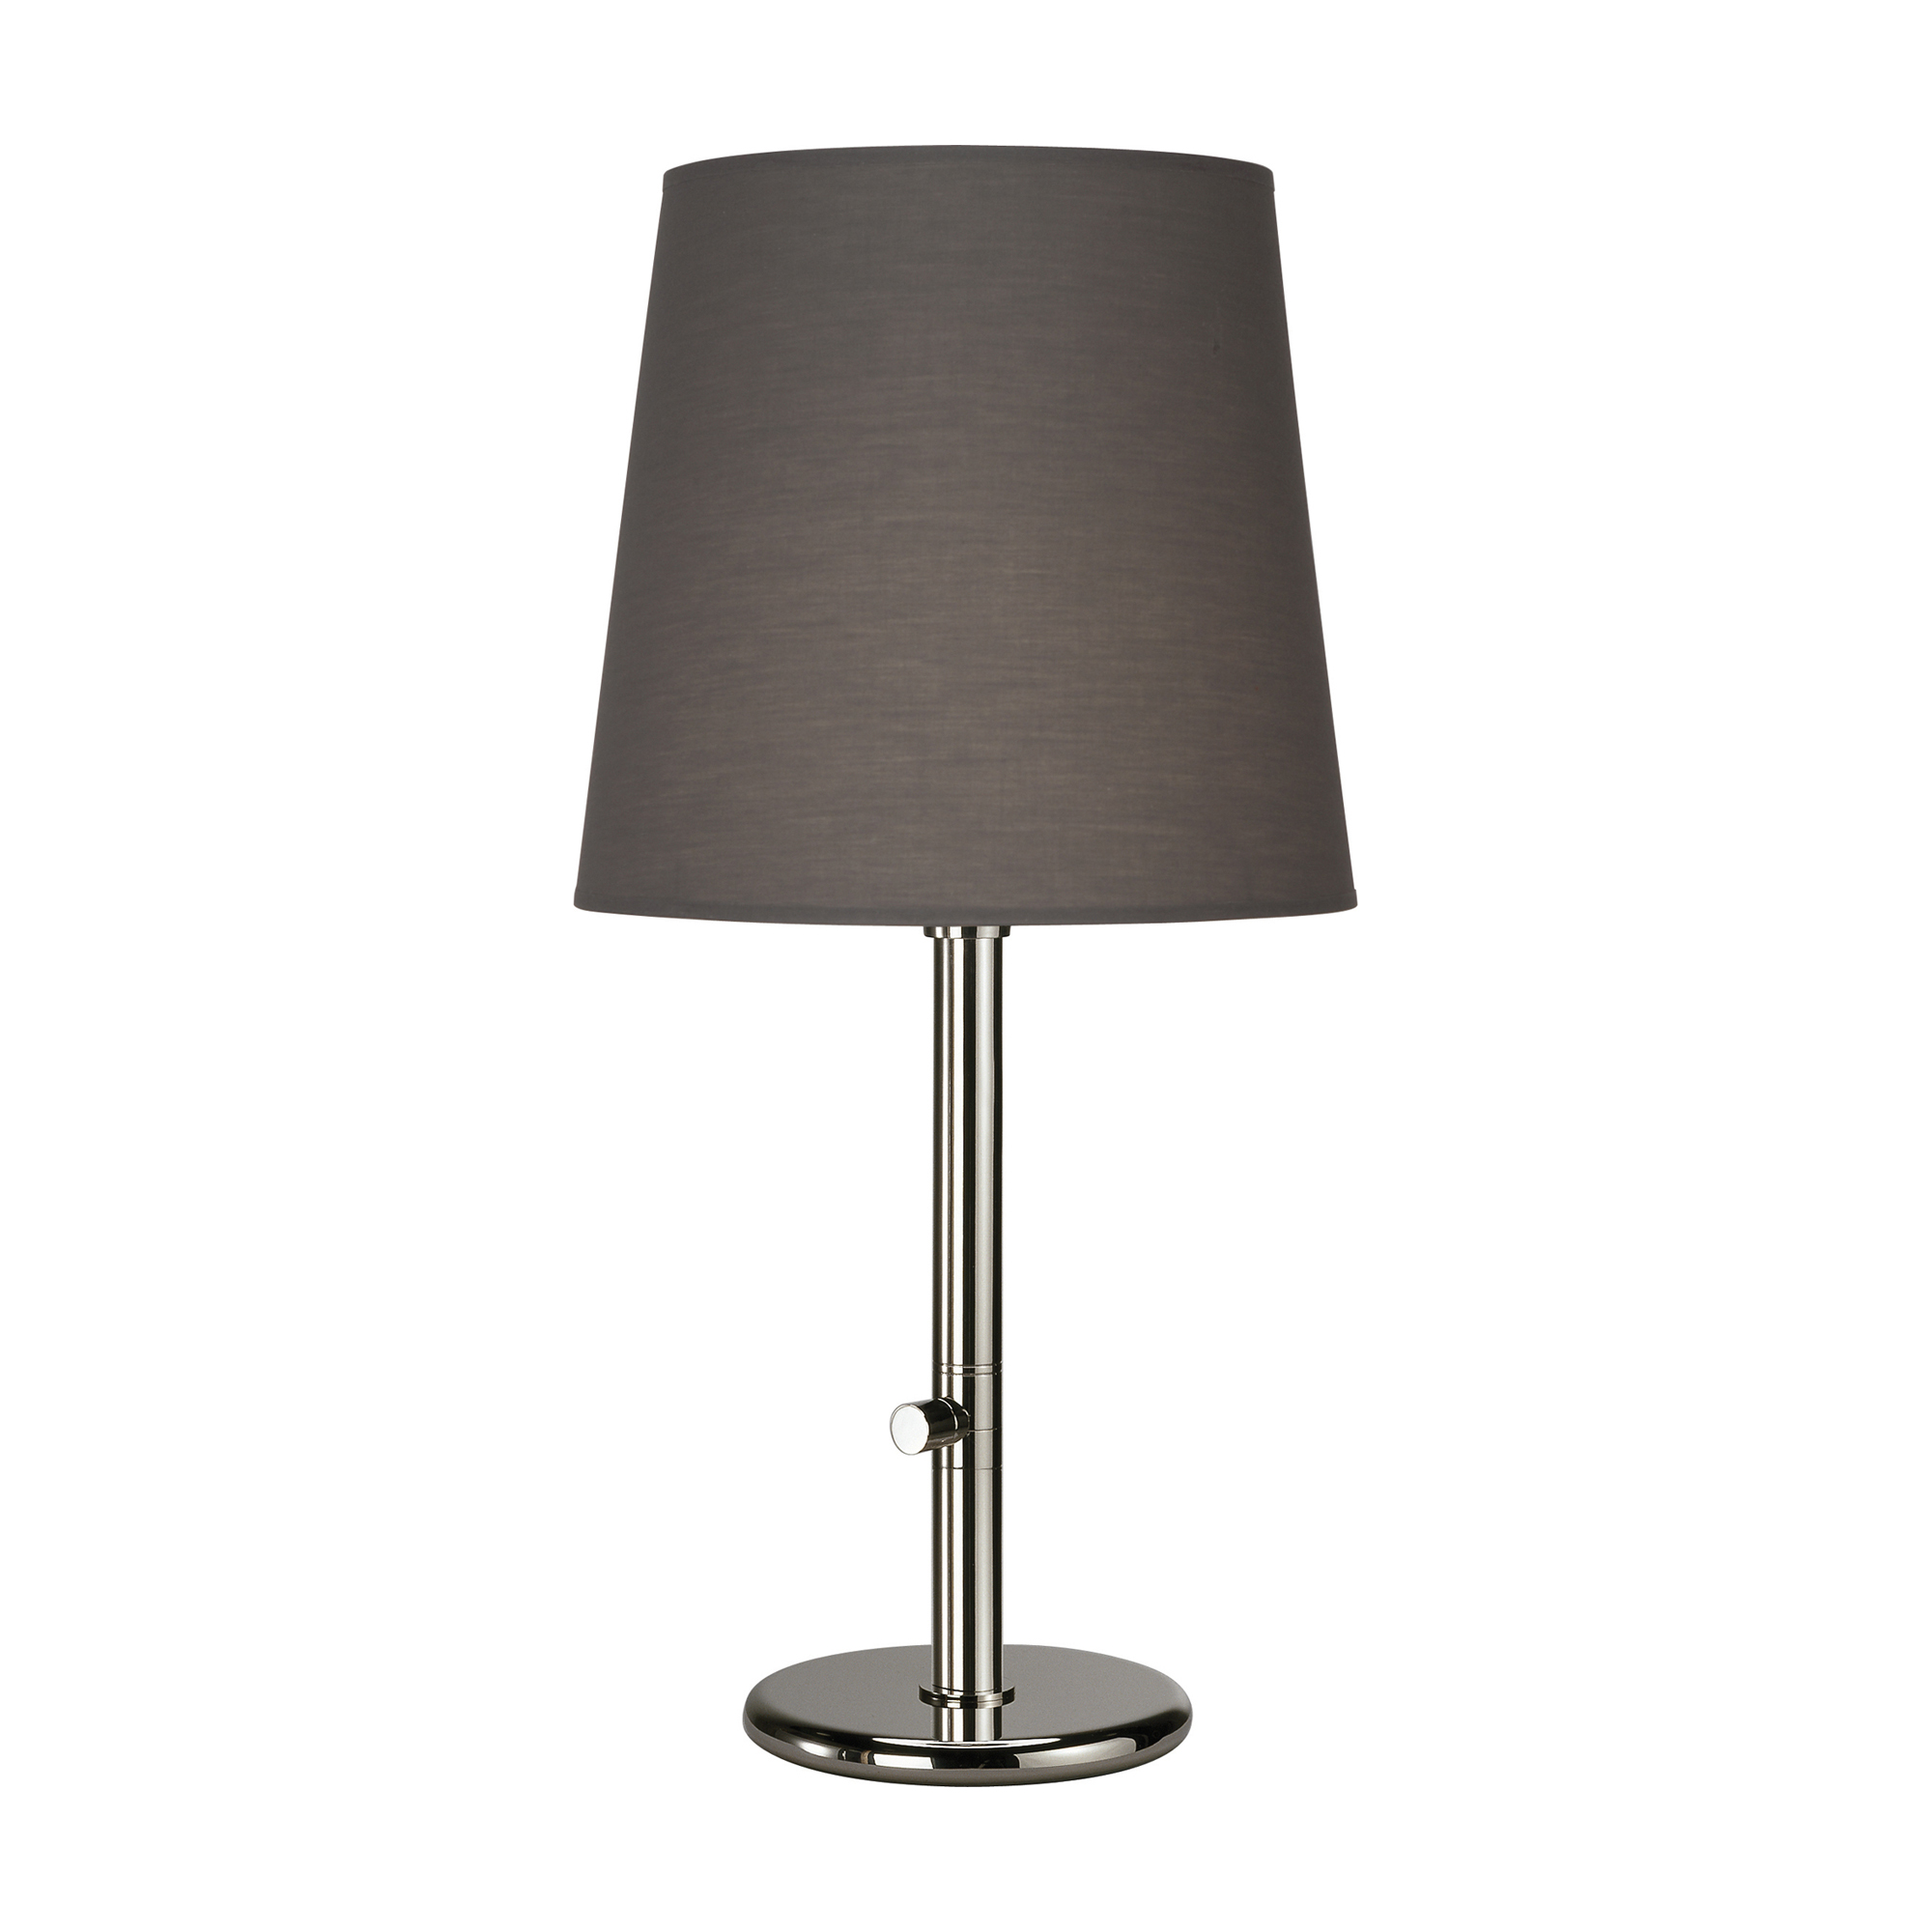 Rico Espinet Buster Chica Accent Lamp Style #2082G